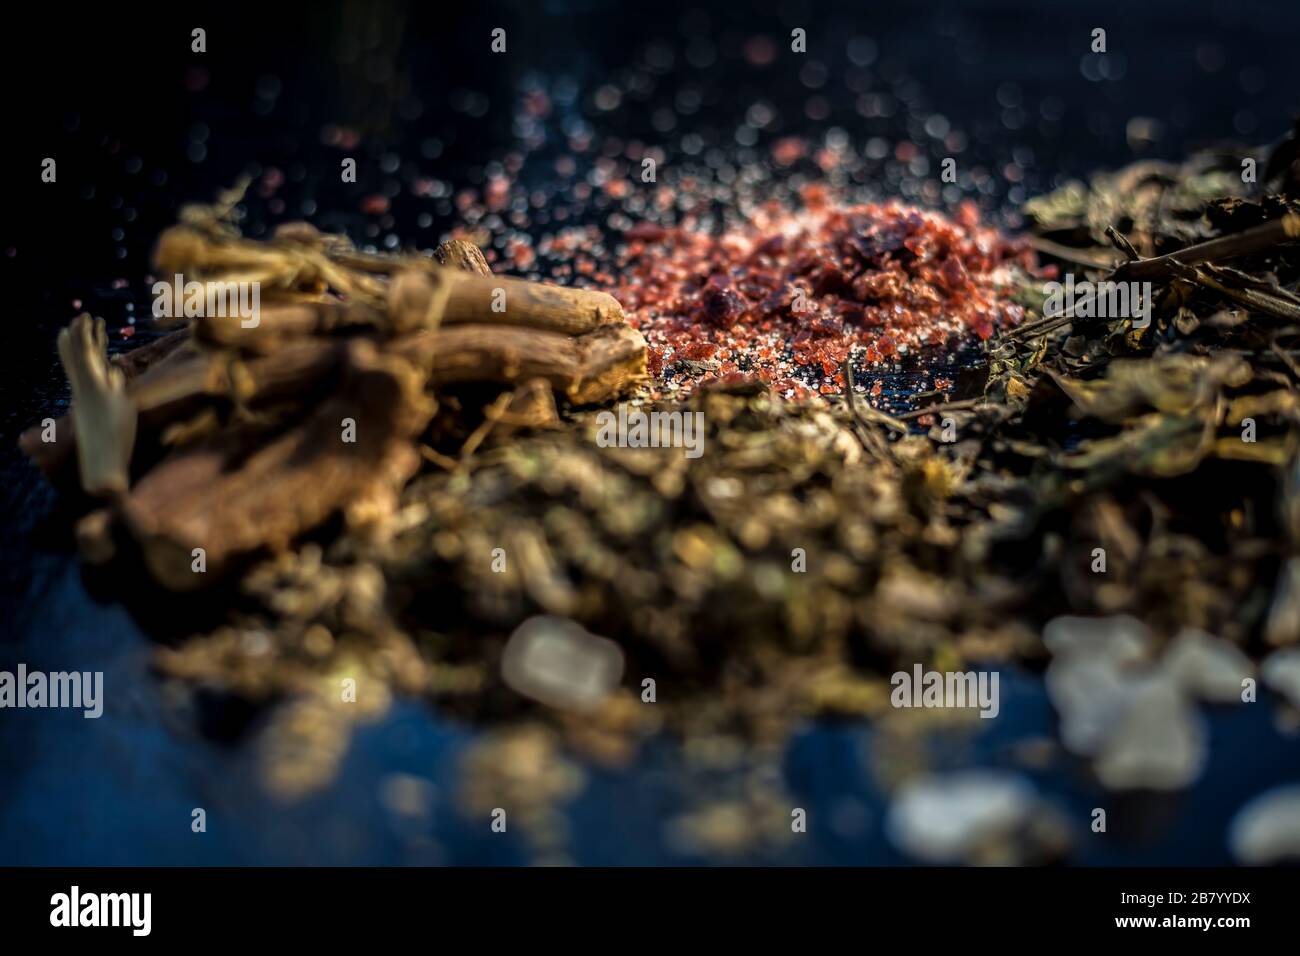 Best home ayurvedic remedy for ulcer i.e. Ardusi or Malabar nut, sugar, and mulethi or licorice. Shot of all the herbs on black surface with powder al Stock Photo